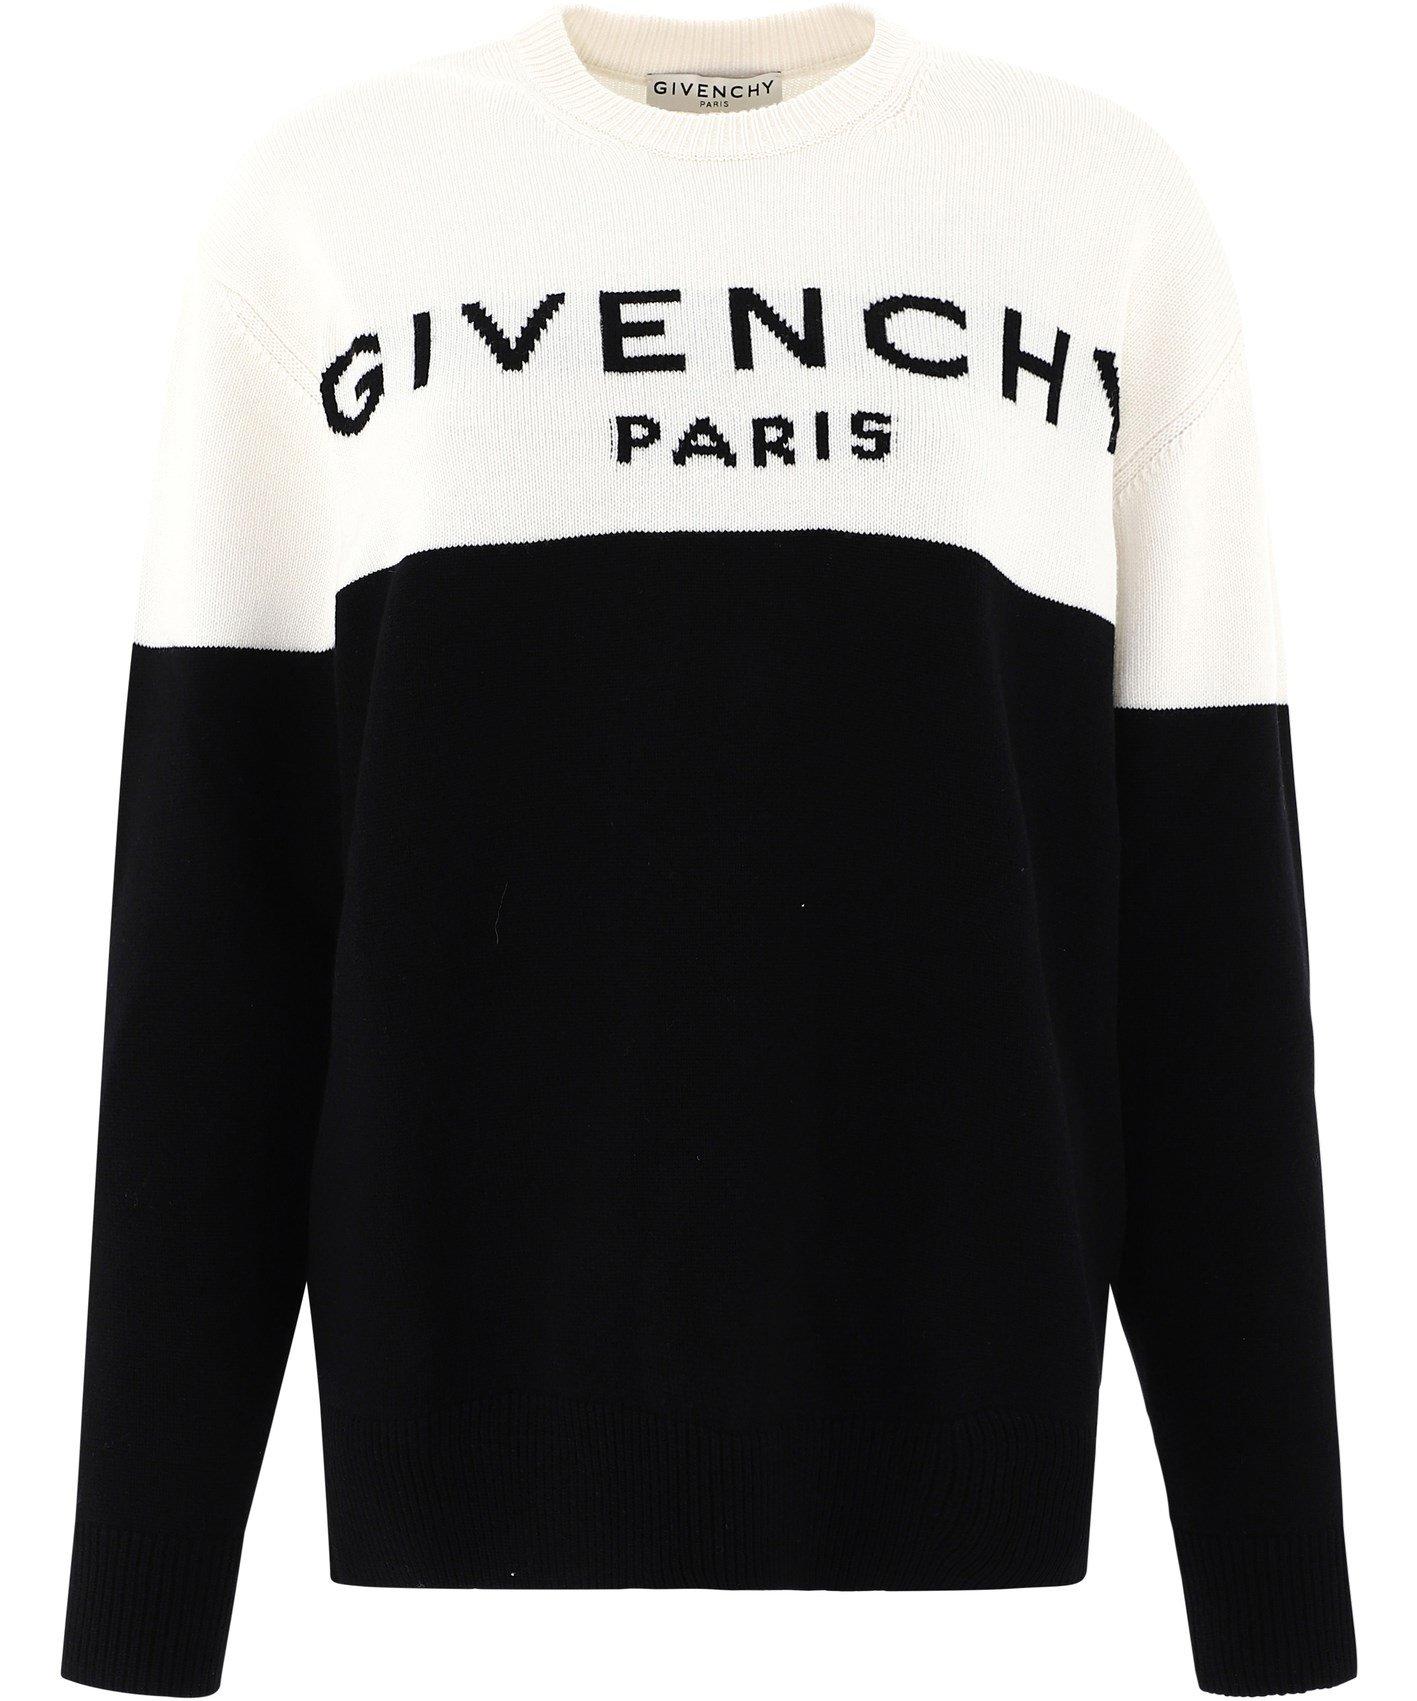 Givenchy Two-tone Intarsia Cashmere Sweater in Black/White (Black) | Lyst